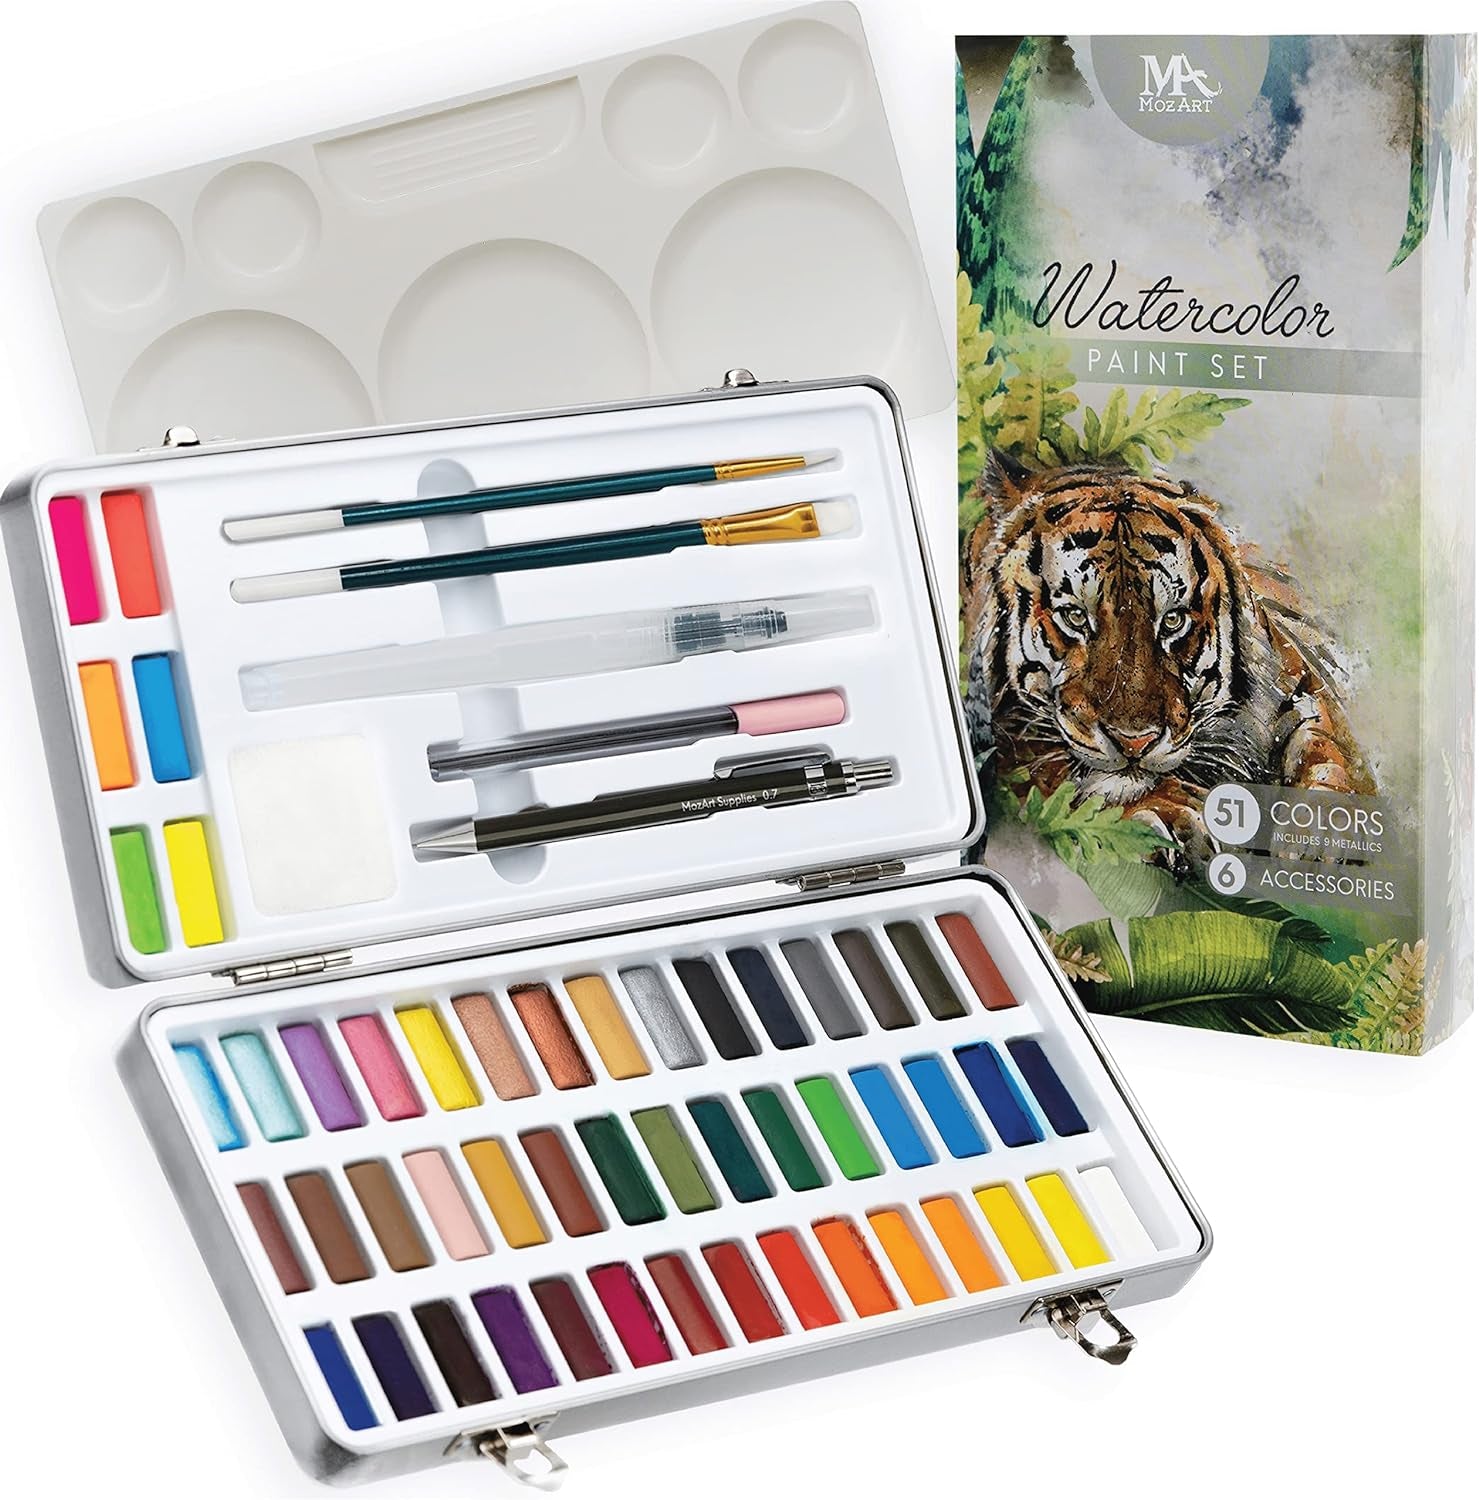 Watercolor Paint Essential Set - 24 Vibrant Colors - Lightweight and Portable - Perfect for Budding Hobbyists and Professional Artists - Water Colors Paint Adult Set with Paintbrush